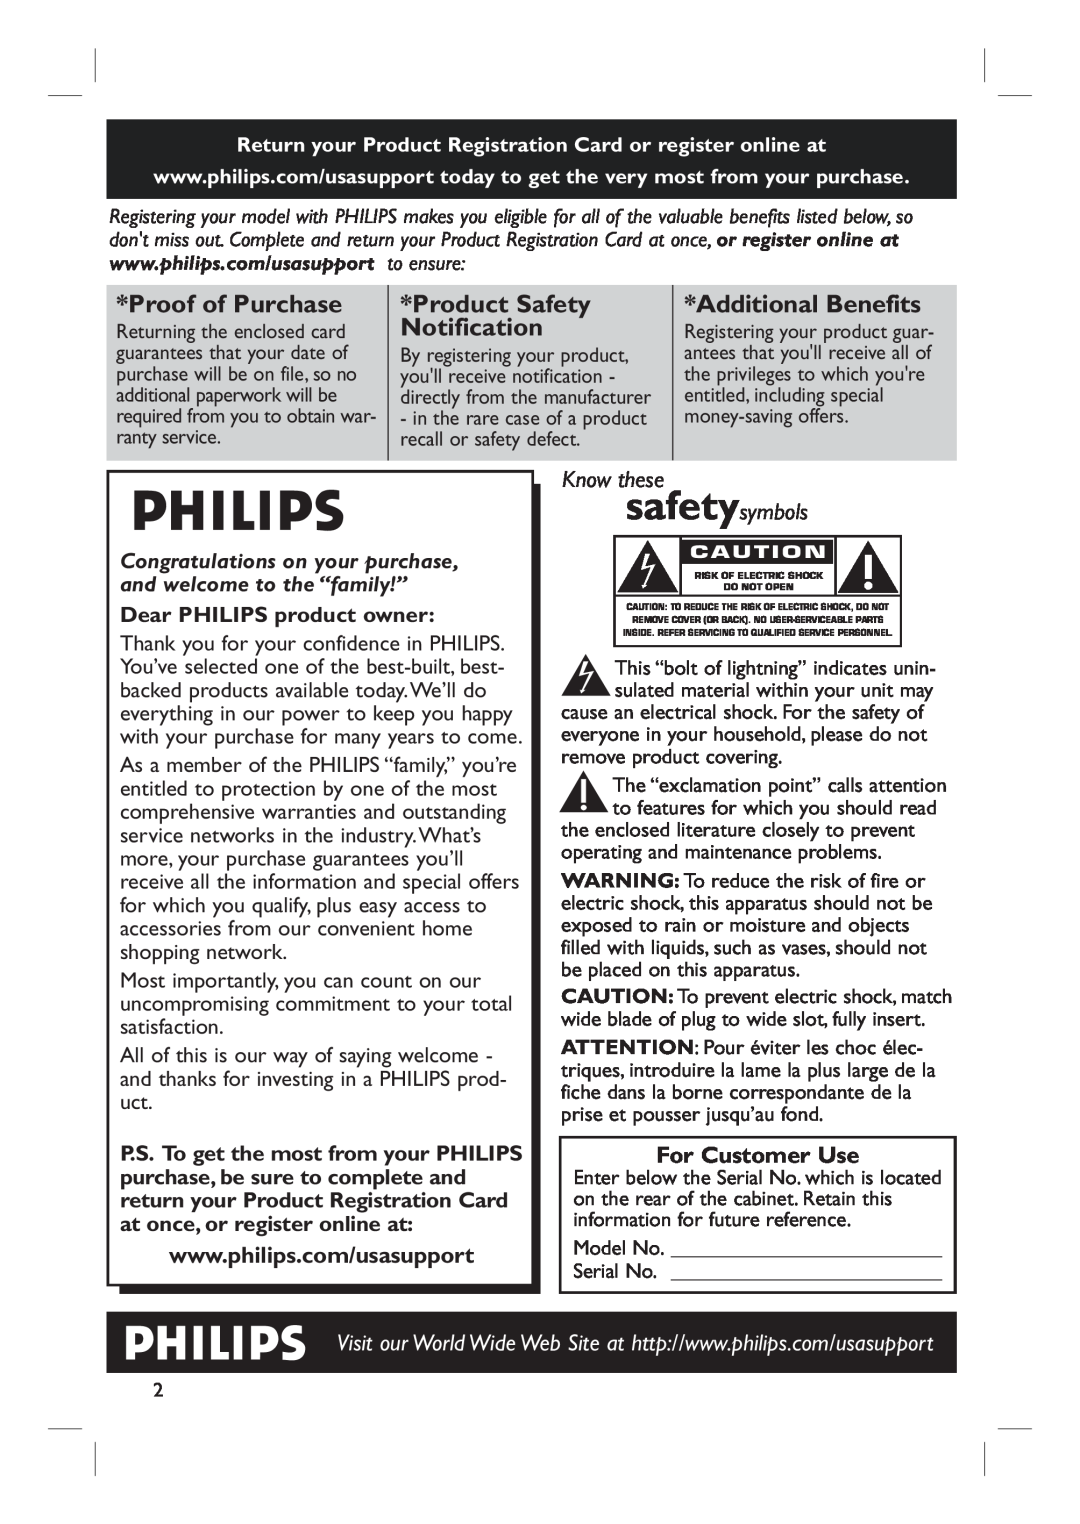 Philips HTS6500 user manual Proof of Purchase, Product Safety Notification, Additional Benefits, For Customer Use 